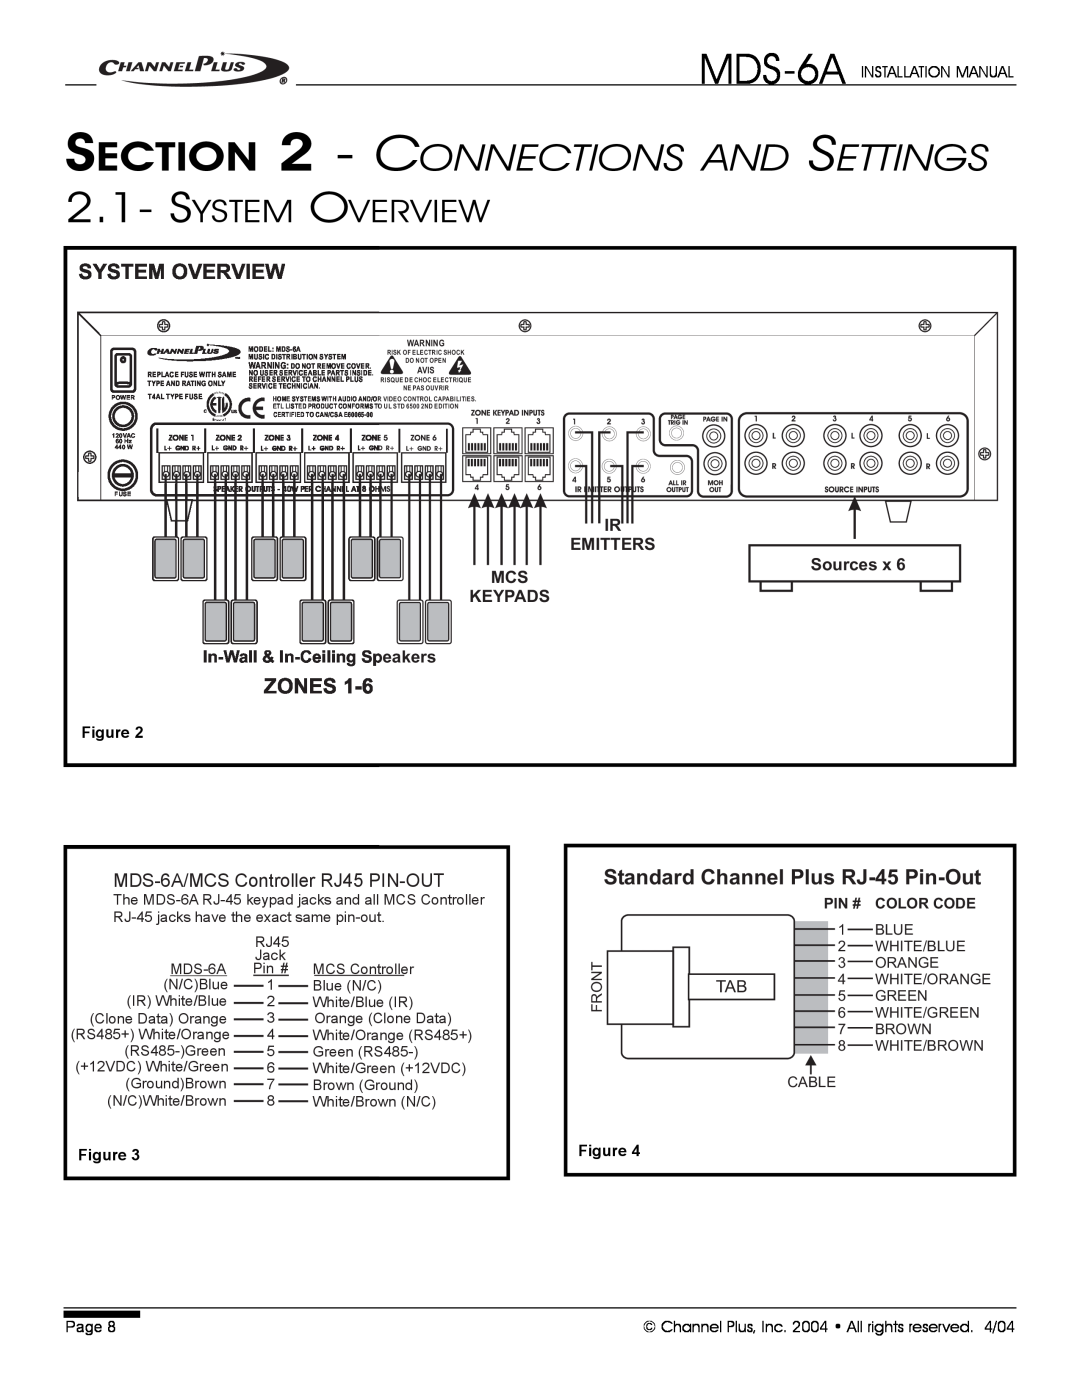 Channel Plus System Overview, MDS-6A/MCSController RJ45 PIN-OUT, Connections And Settings, Zones, Keypads, Emitters 